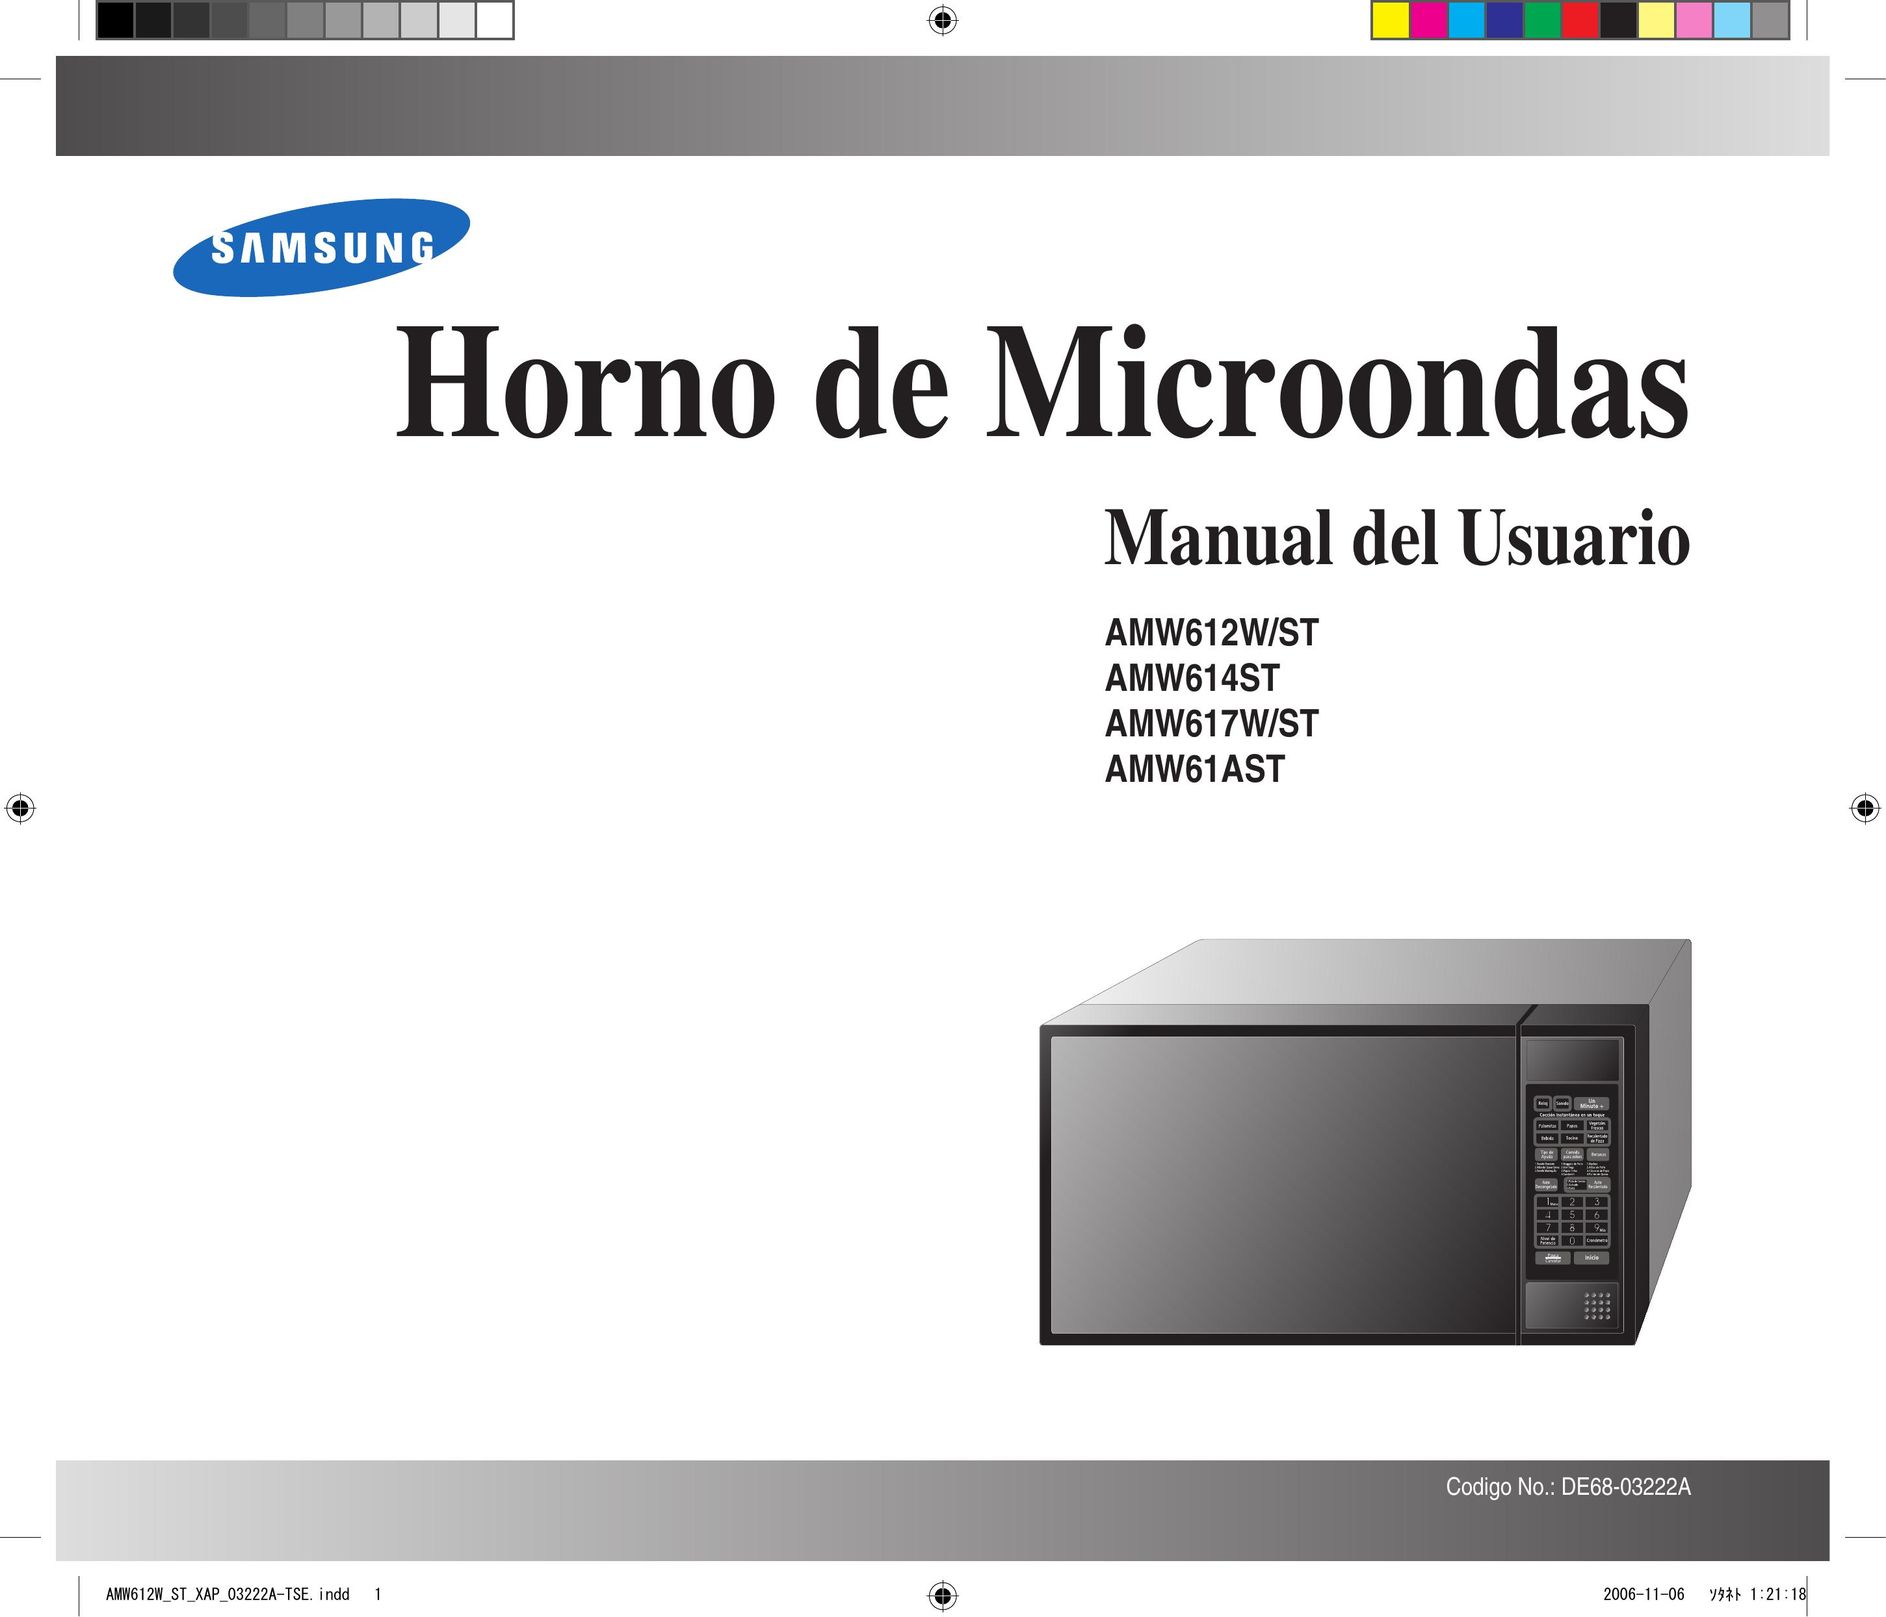 Samsung AMW617W/ST Microwave Oven User Manual